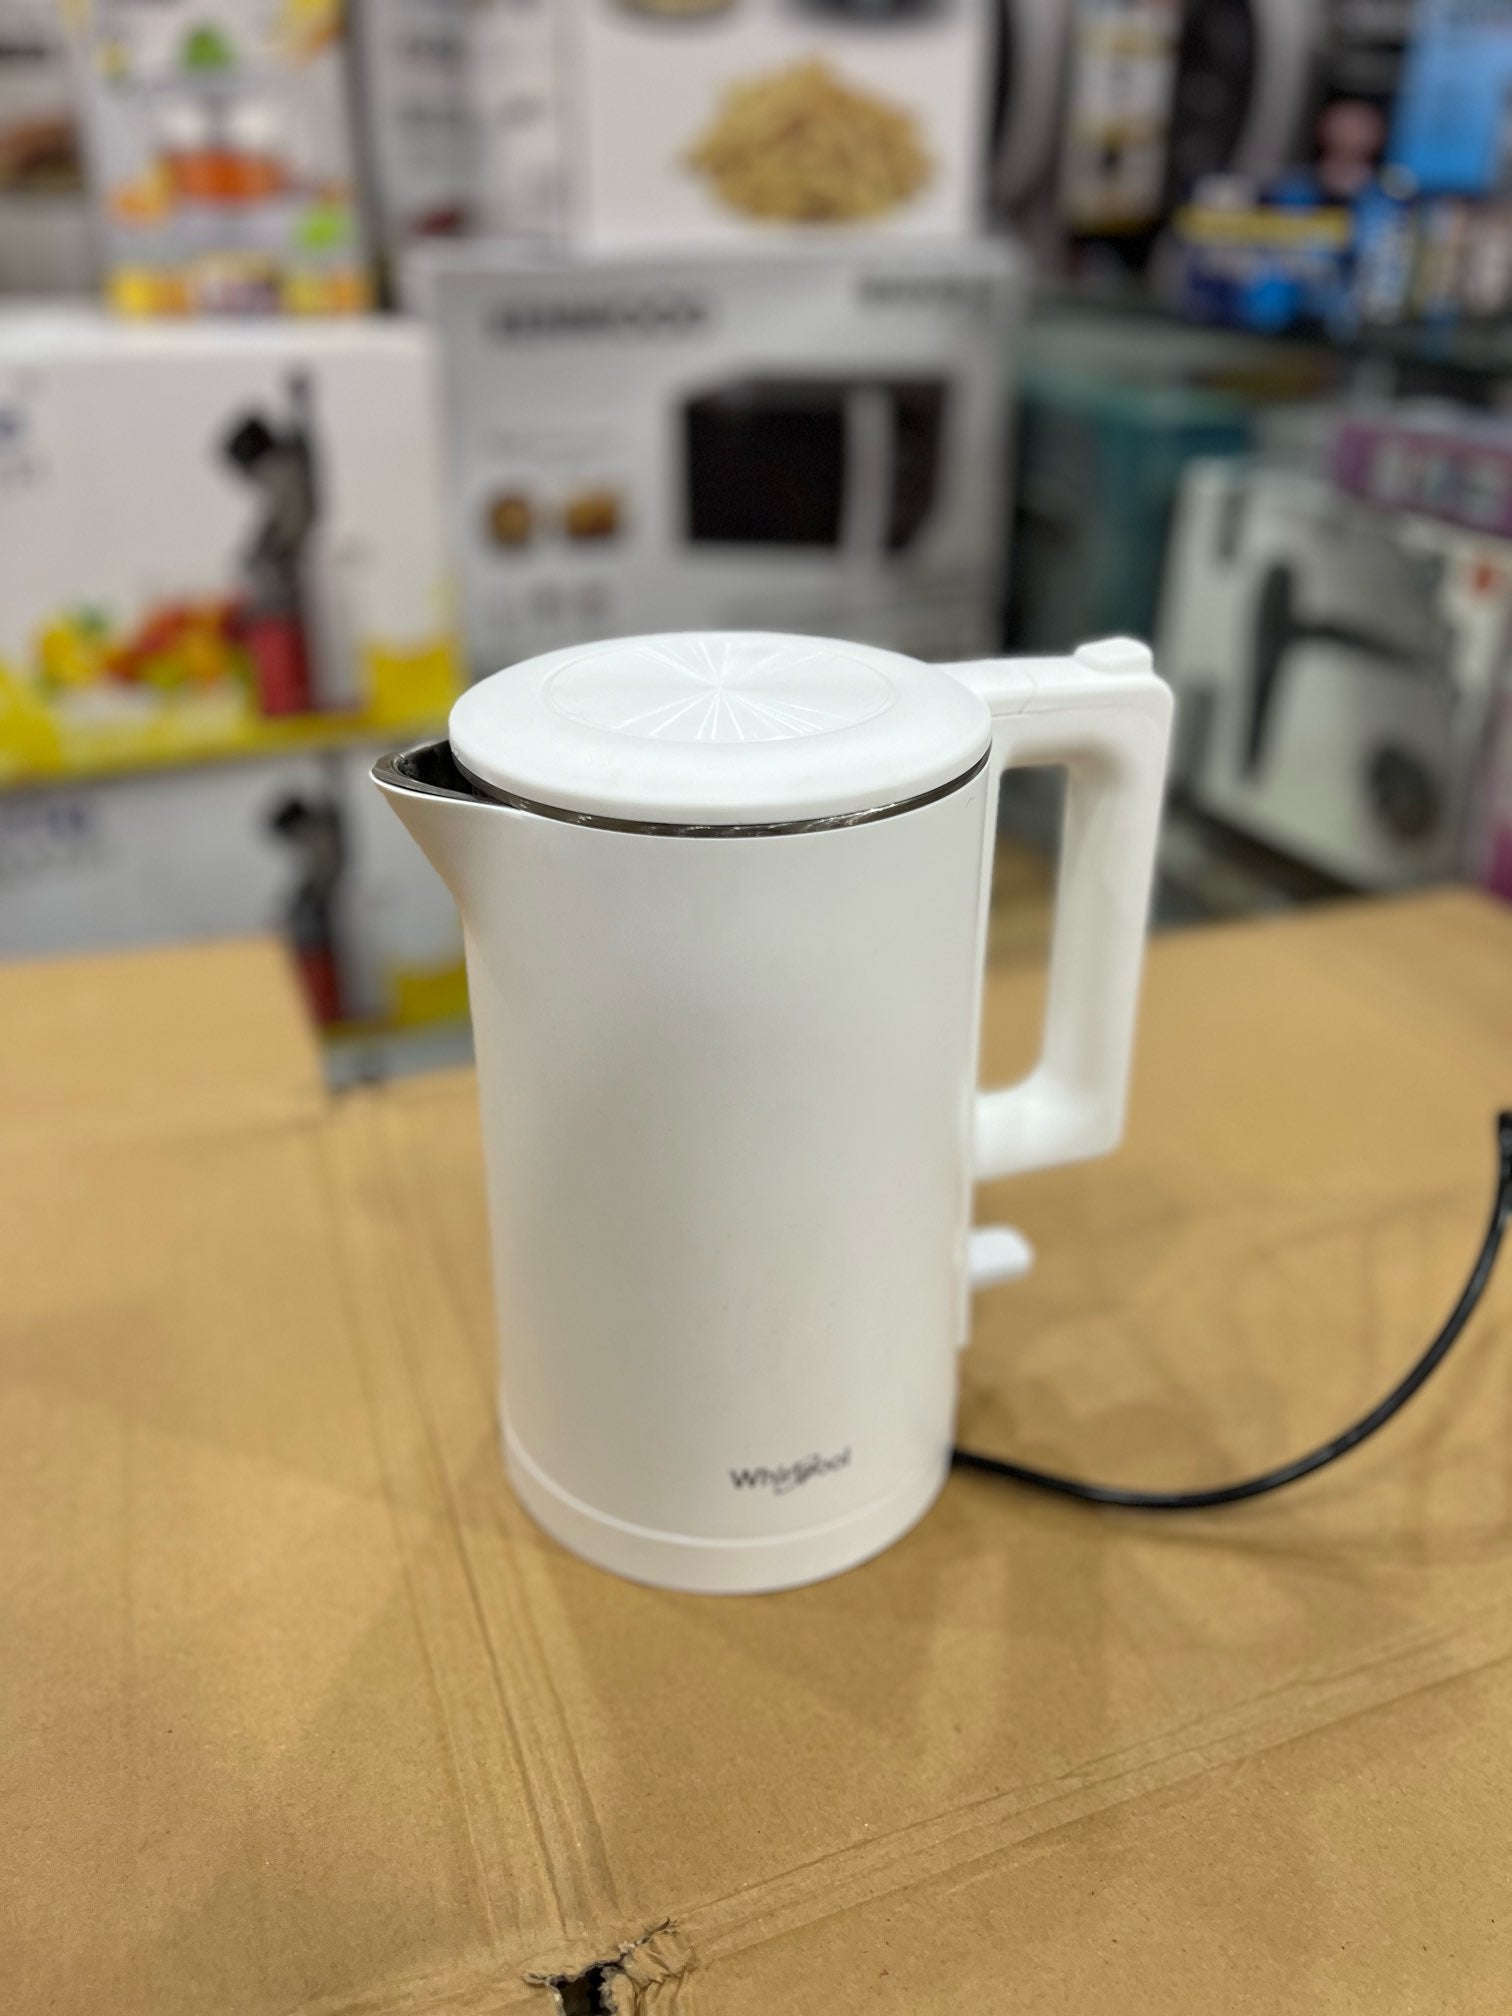 Imported Whirlpool Electric Kettle 1.7L